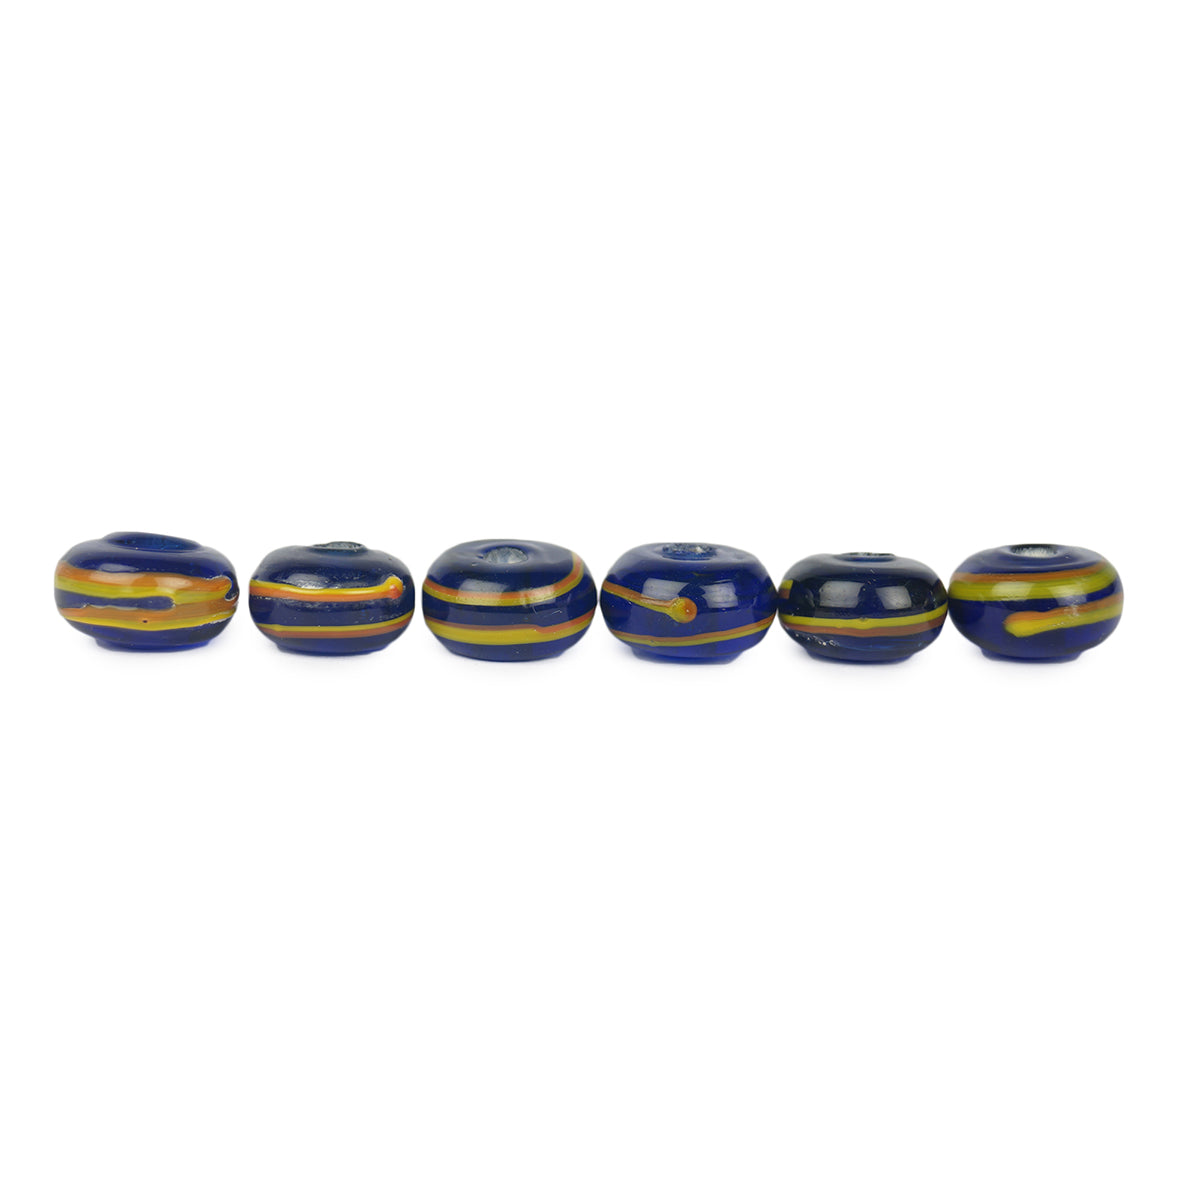 Blue bead with yellow decor